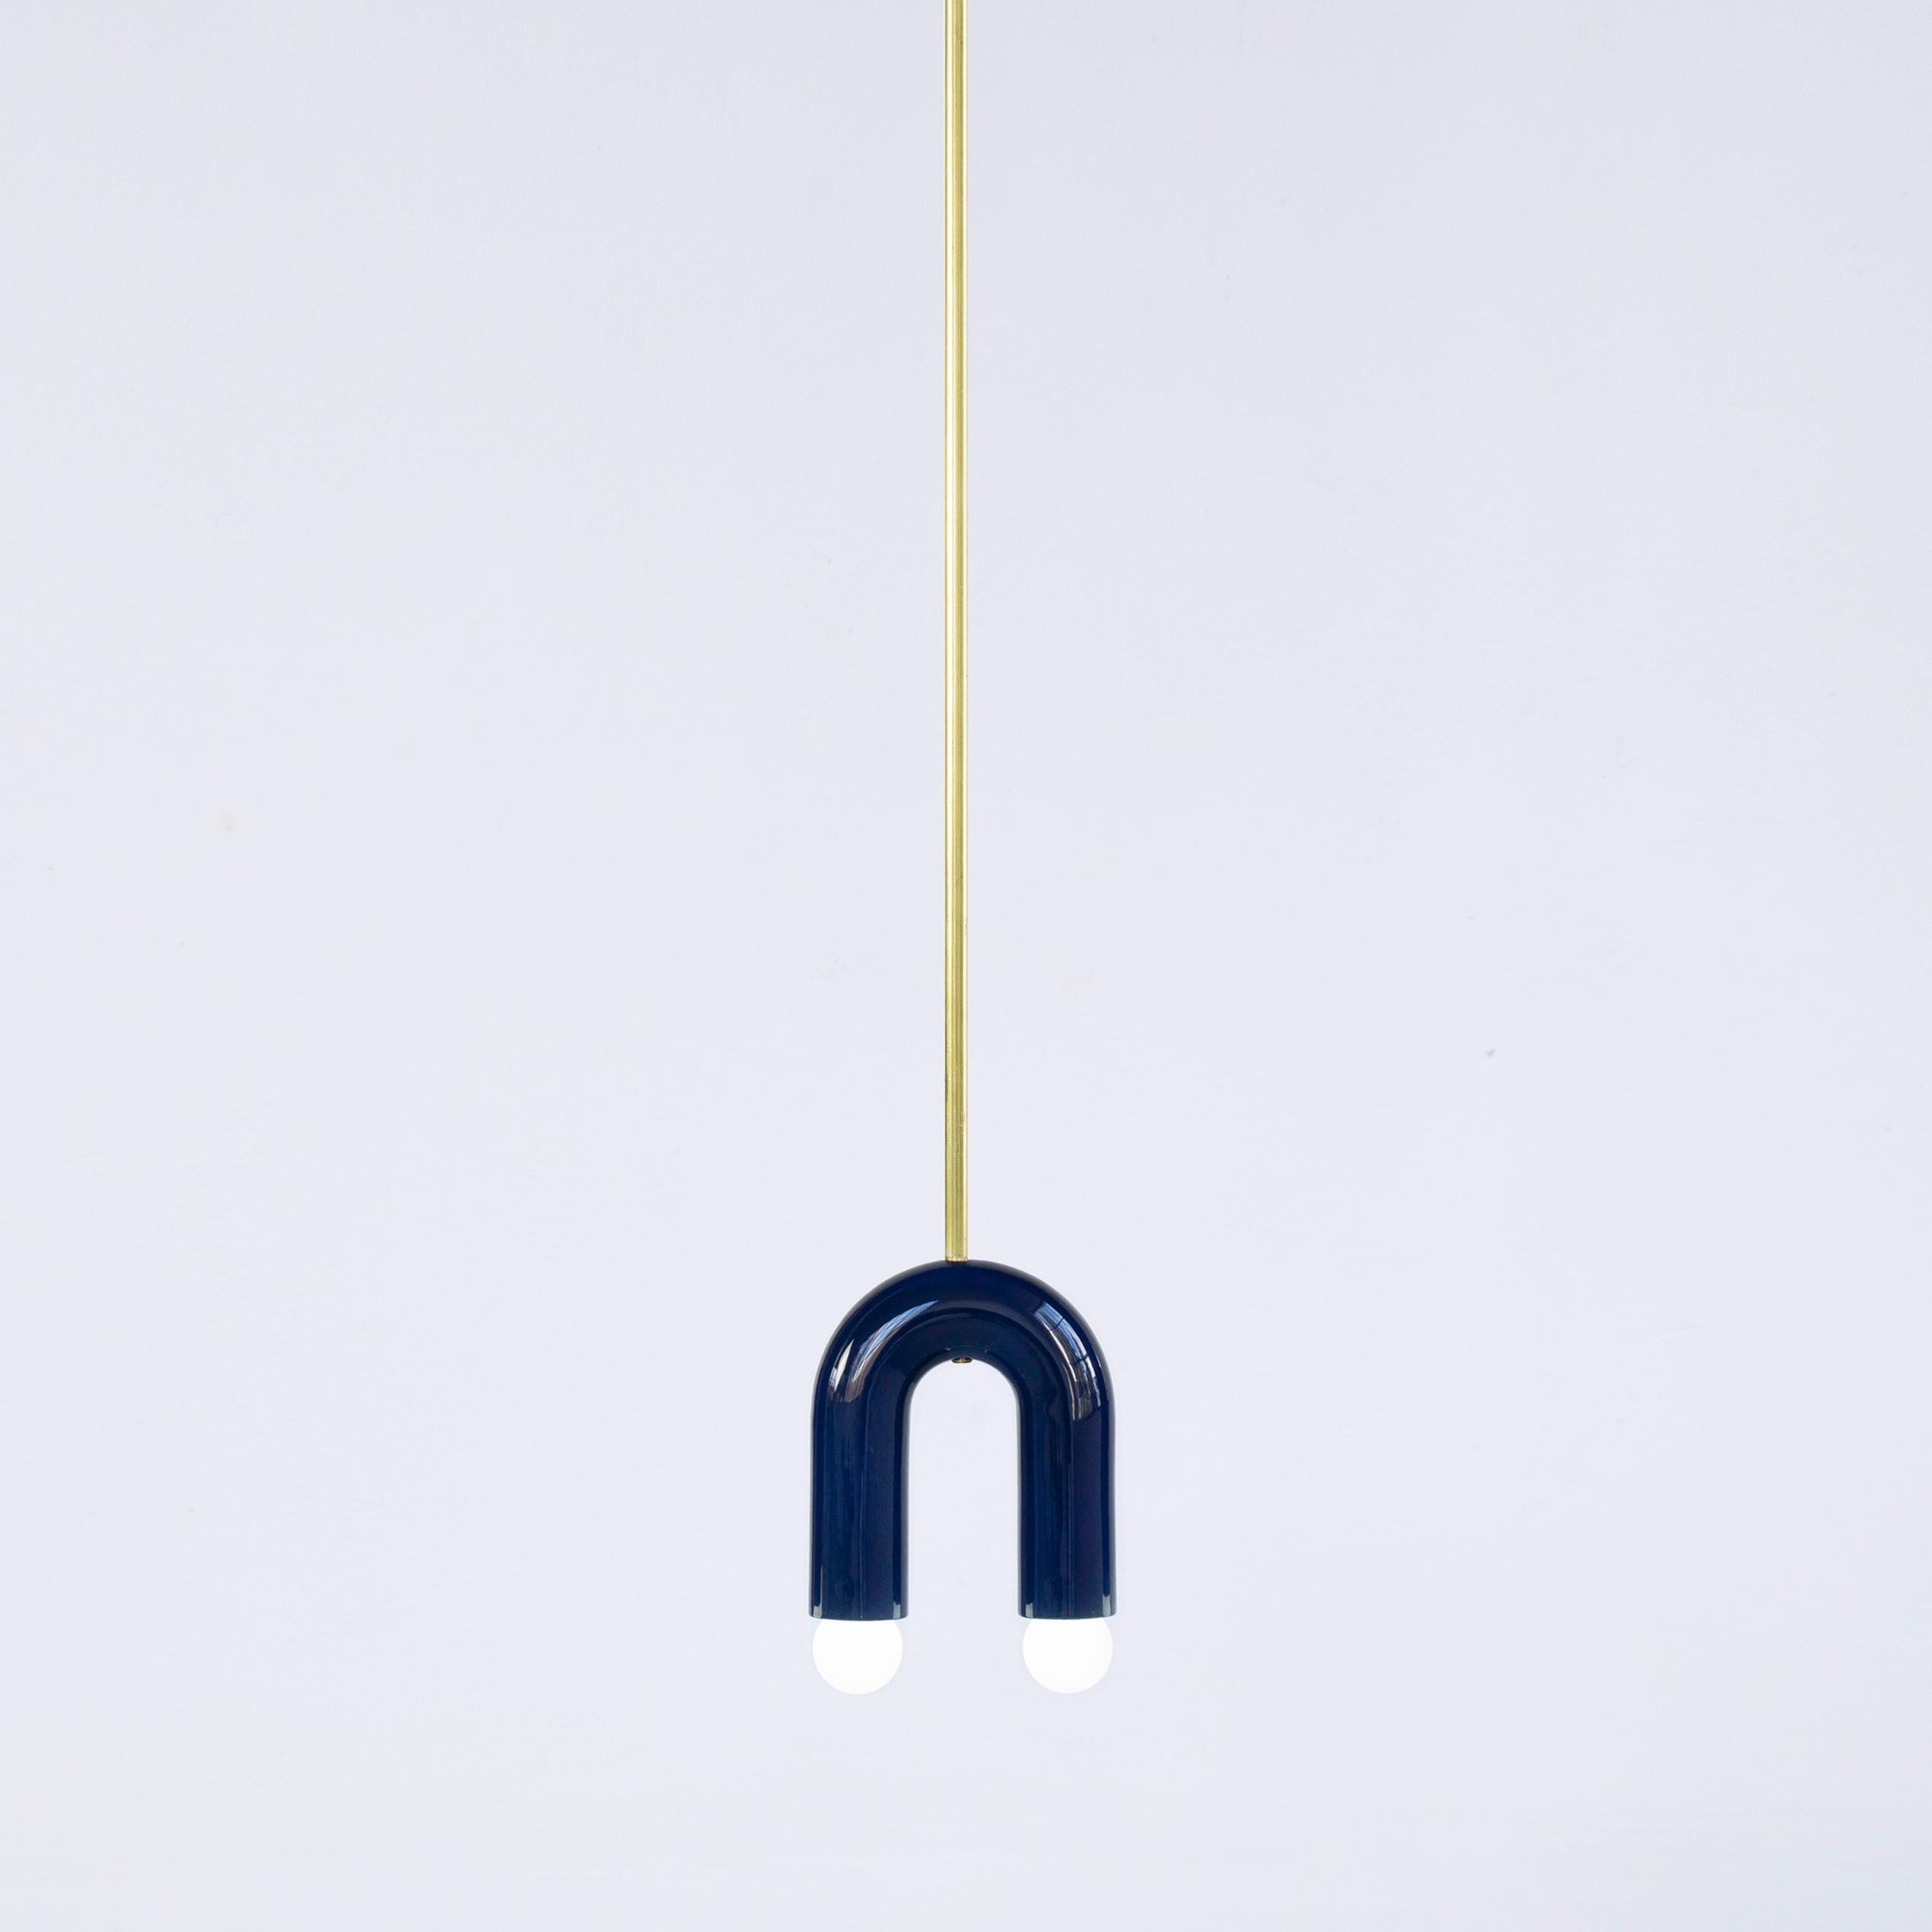 Navy TRN A1 pendant lamp by Pani Jurek
Dimensions: D 5 x W 15 x H 18 cm 
Material: ceramic and brass.
Available in other colors.
Lamps from the TRN collection hang on a metal tube, not on a cable. This allows the lamp to be mounted in a specific